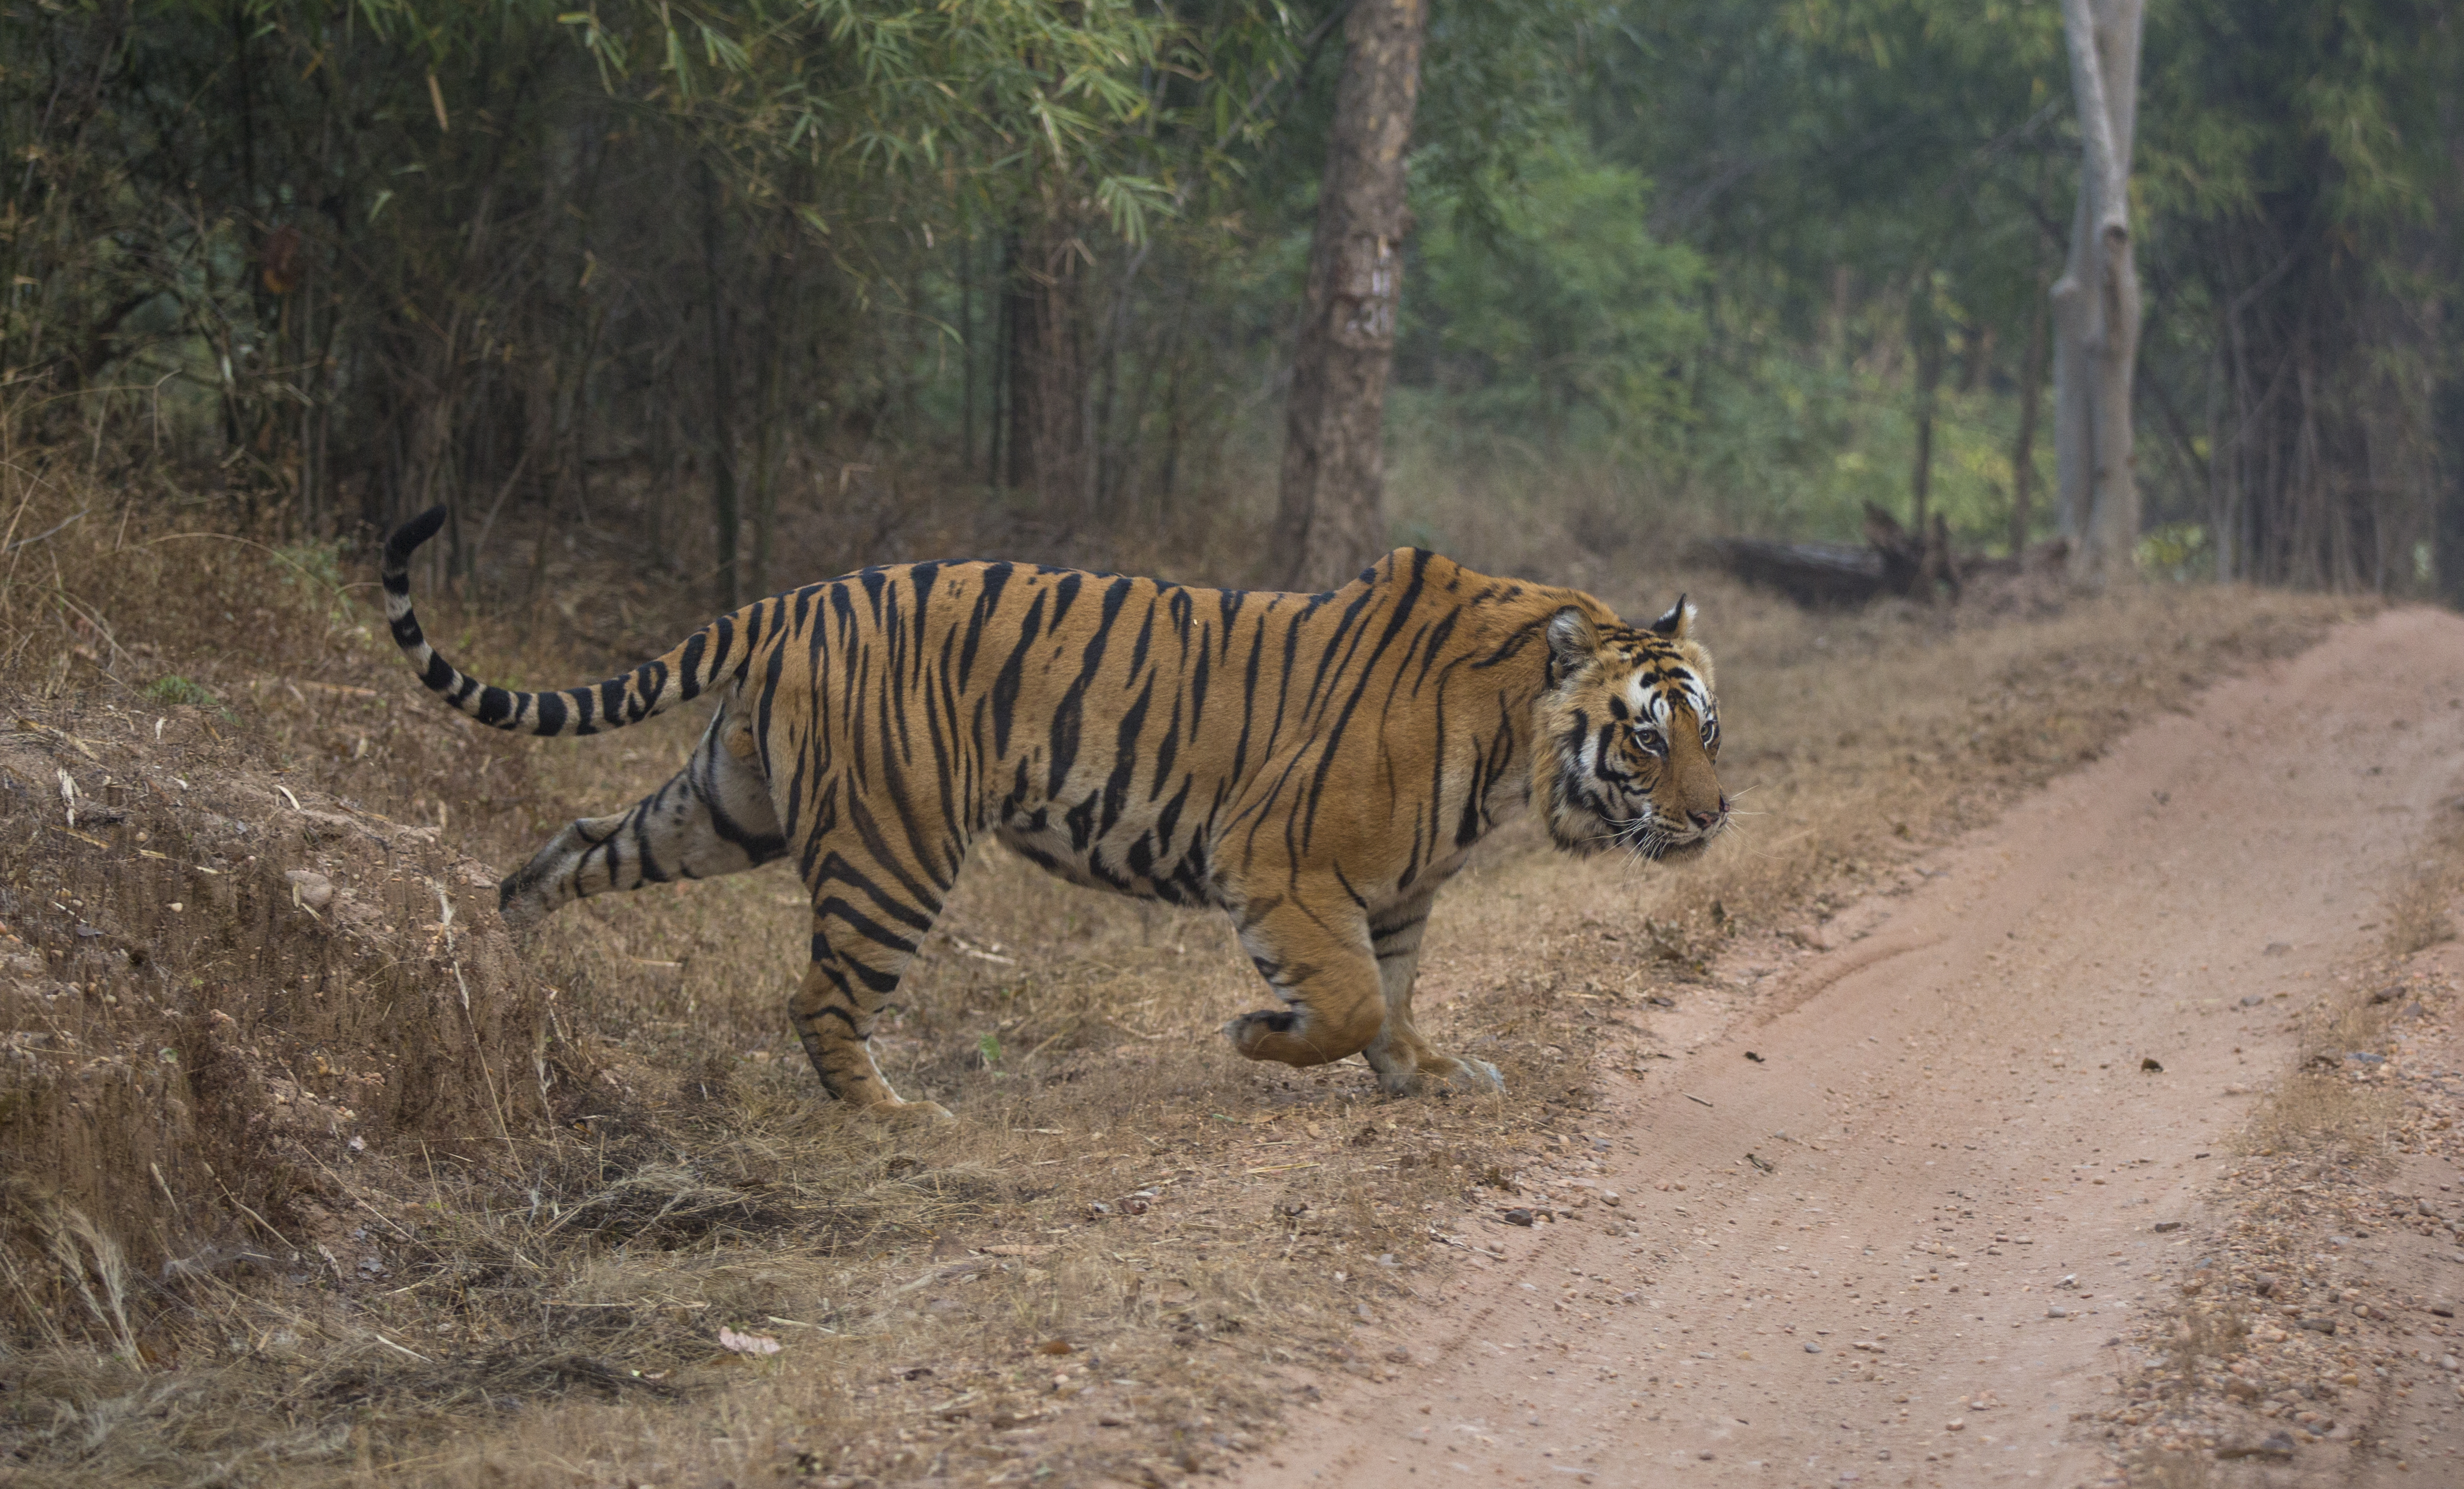 Bandhavgarh: Legend, Folklore and the Morning Show